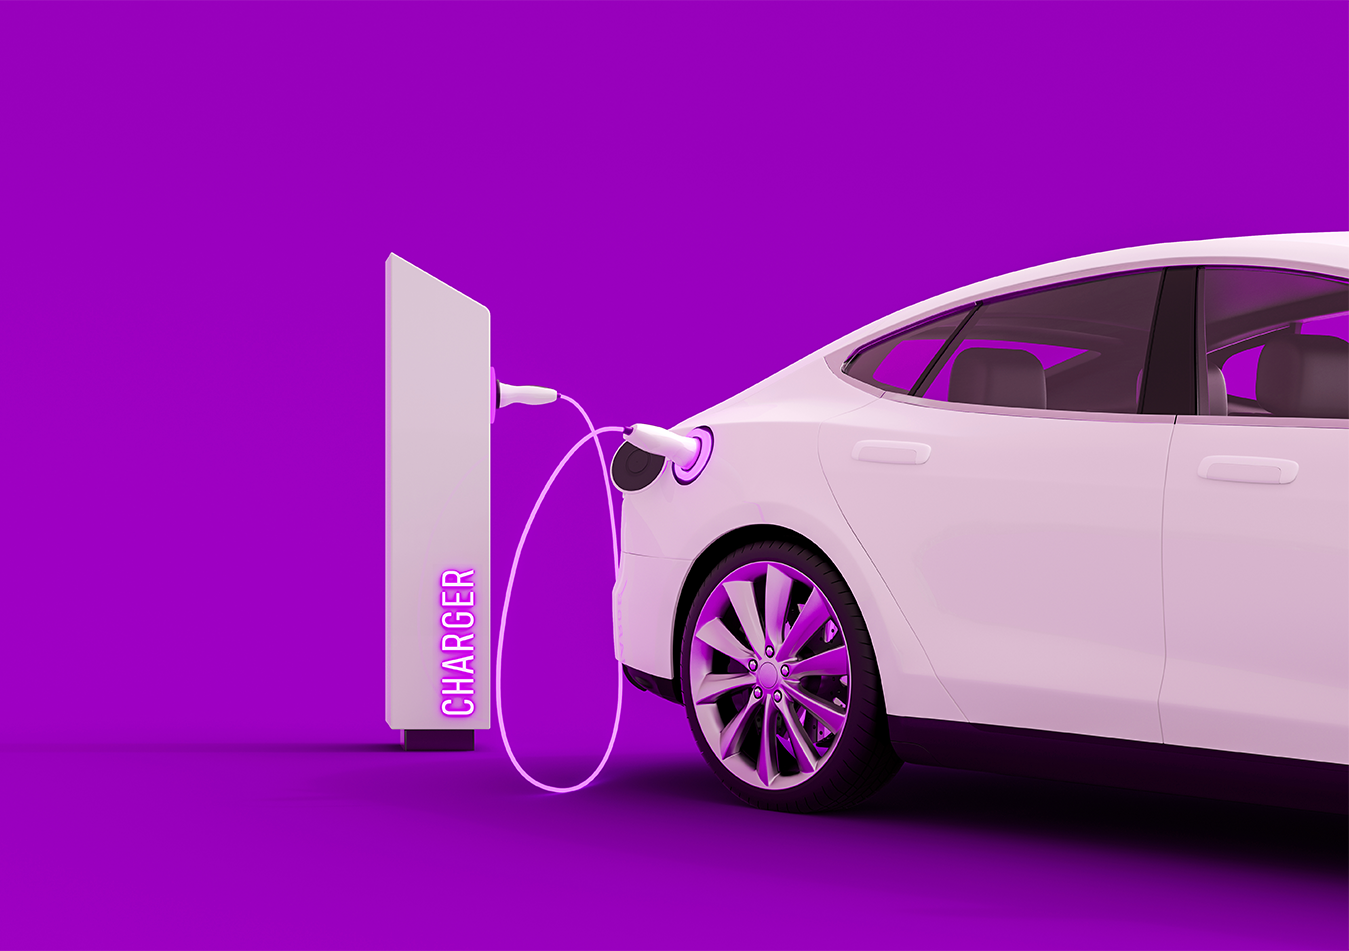 electric vehicle plugged into a charging station with purple background